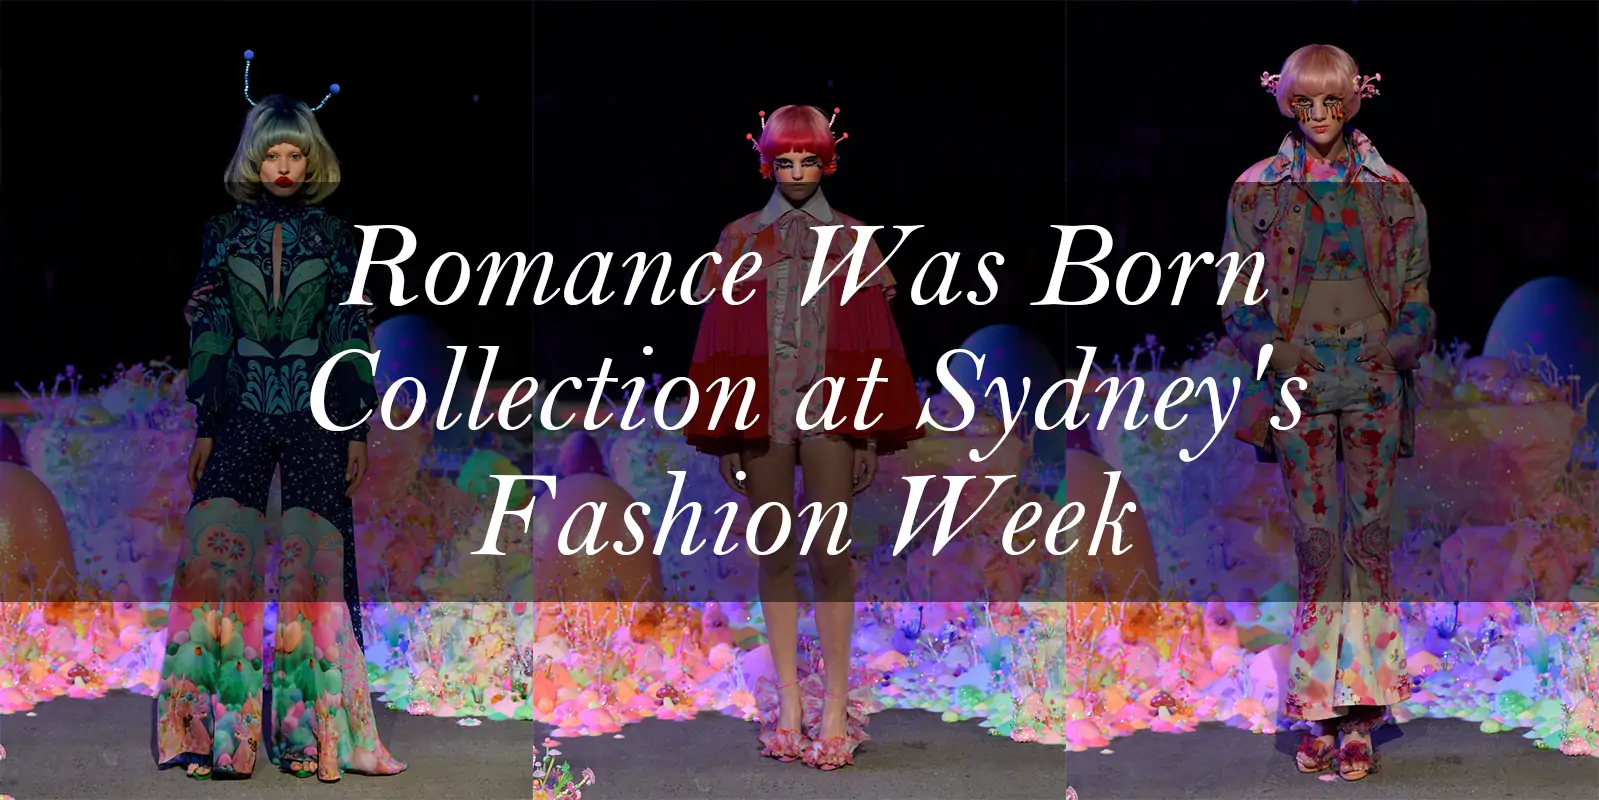 Romance Was Born Collection at Sydney's Fashion Week